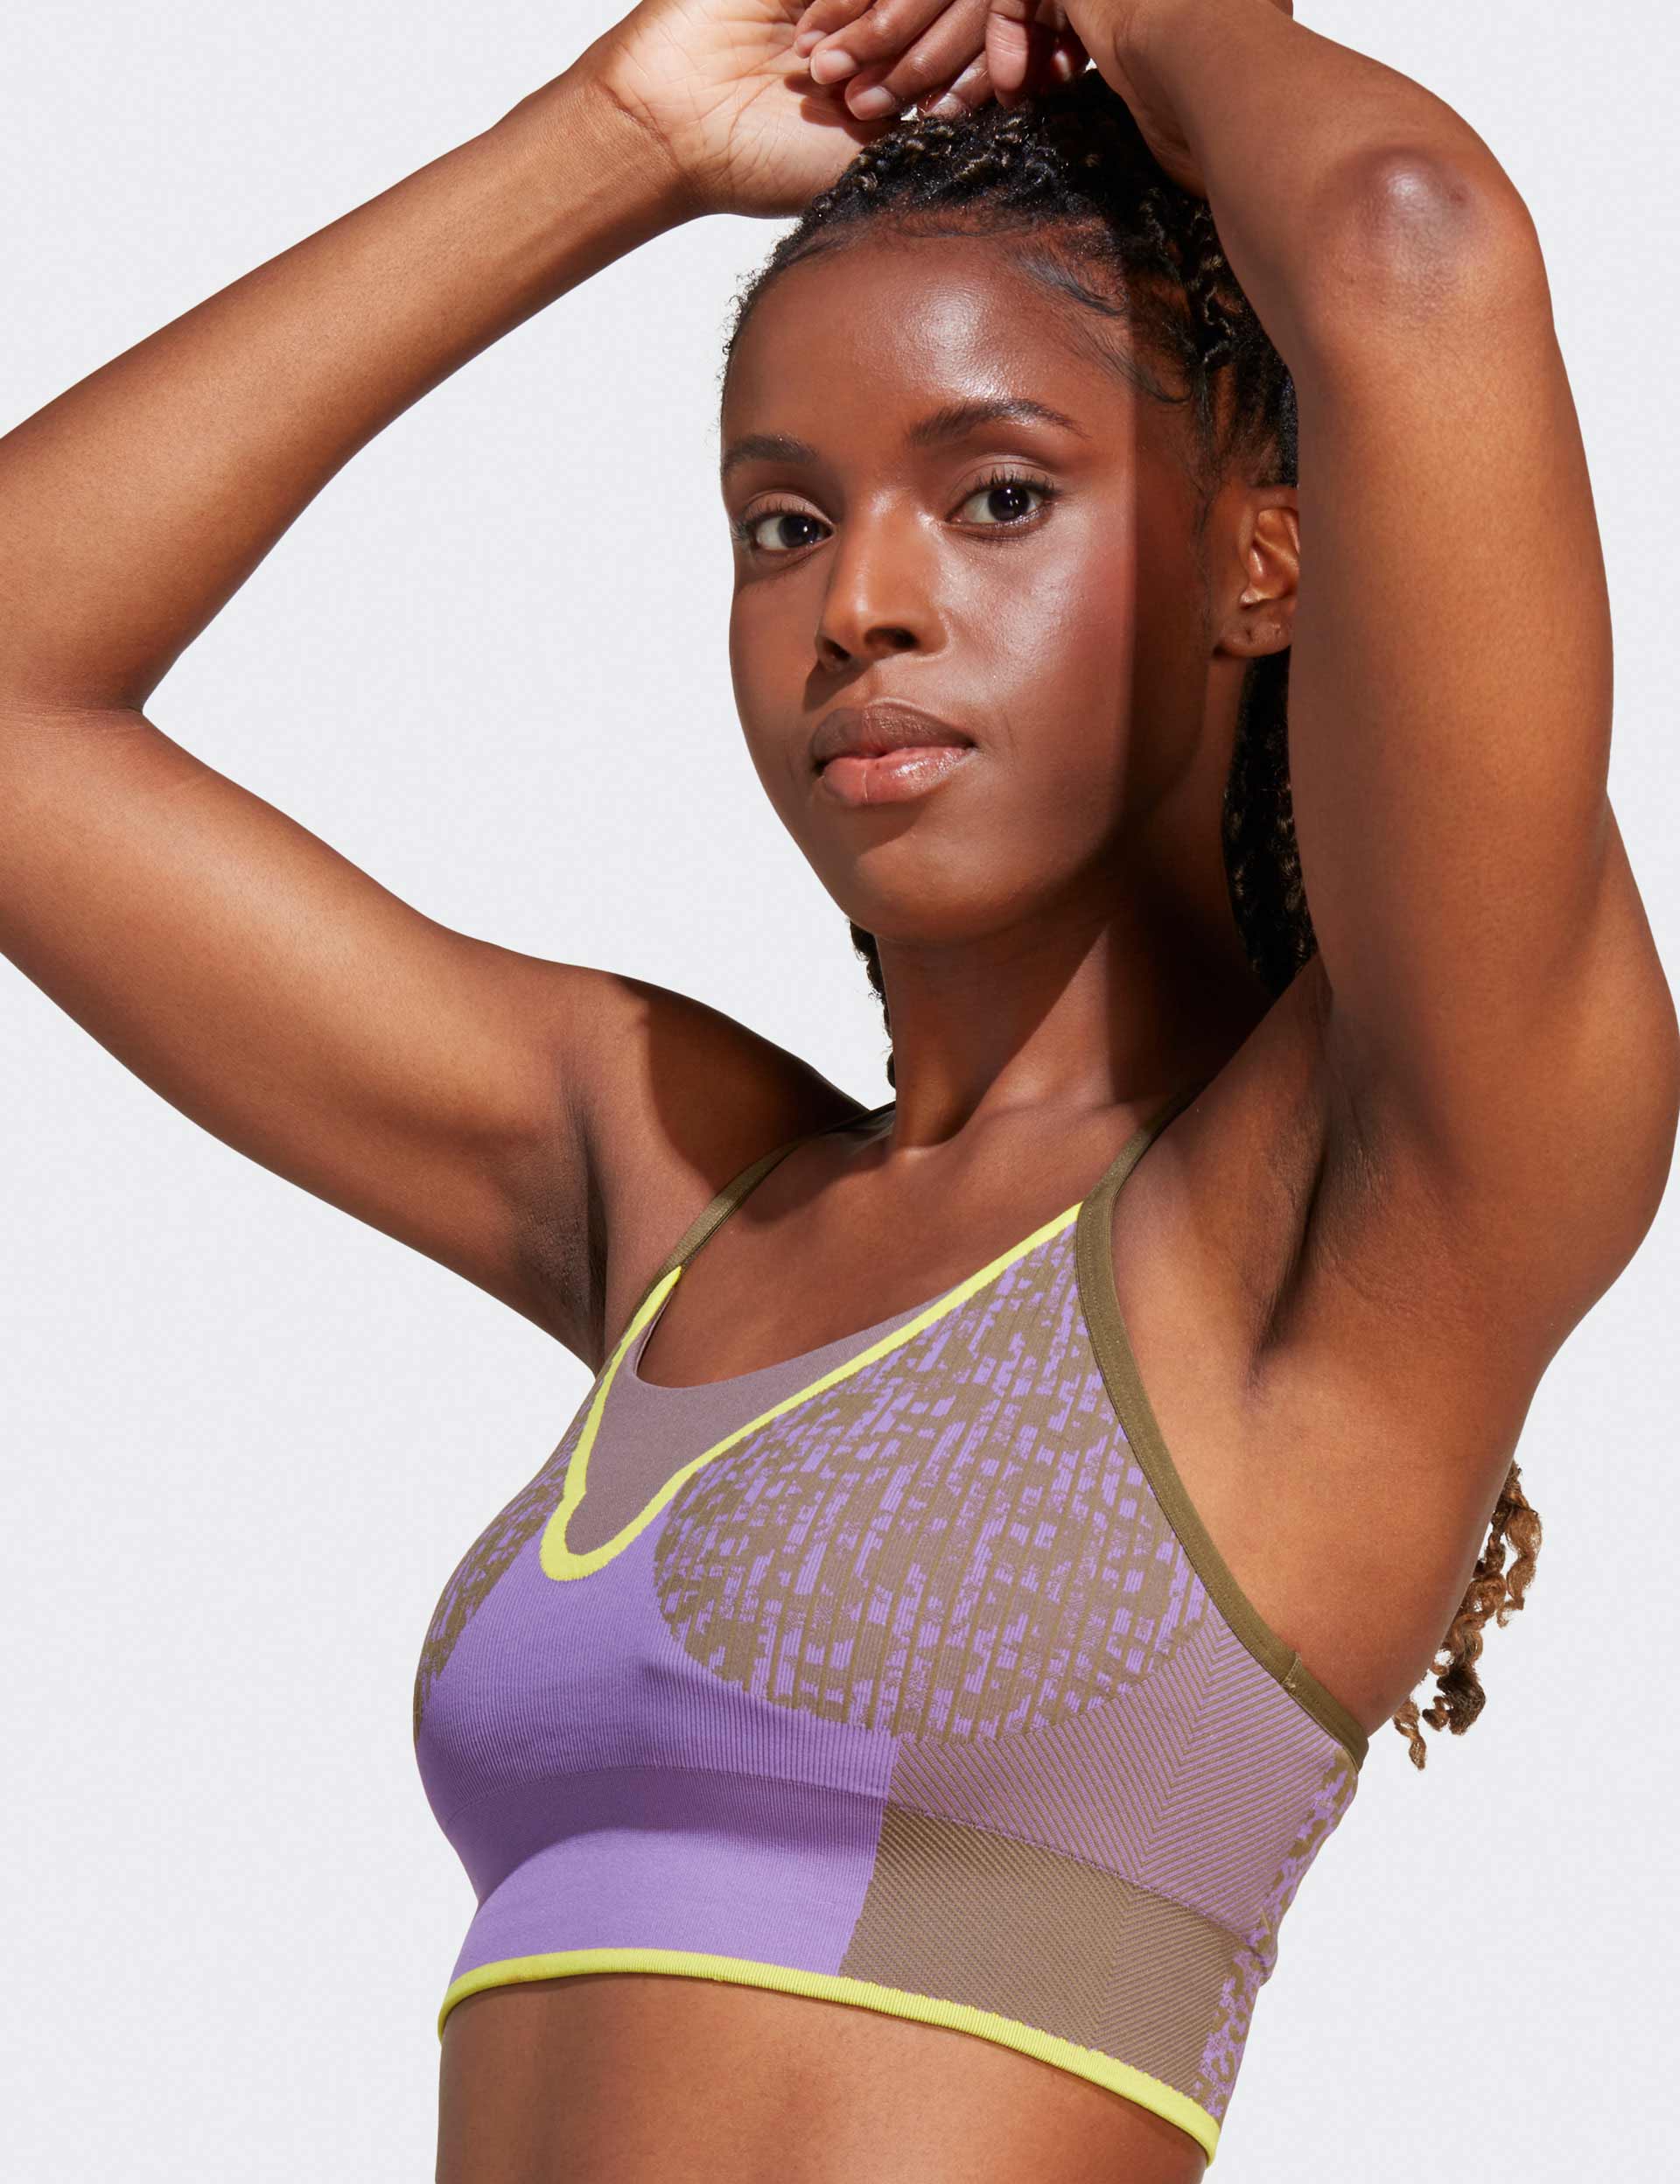 Women's yoga bra made of recycled materials